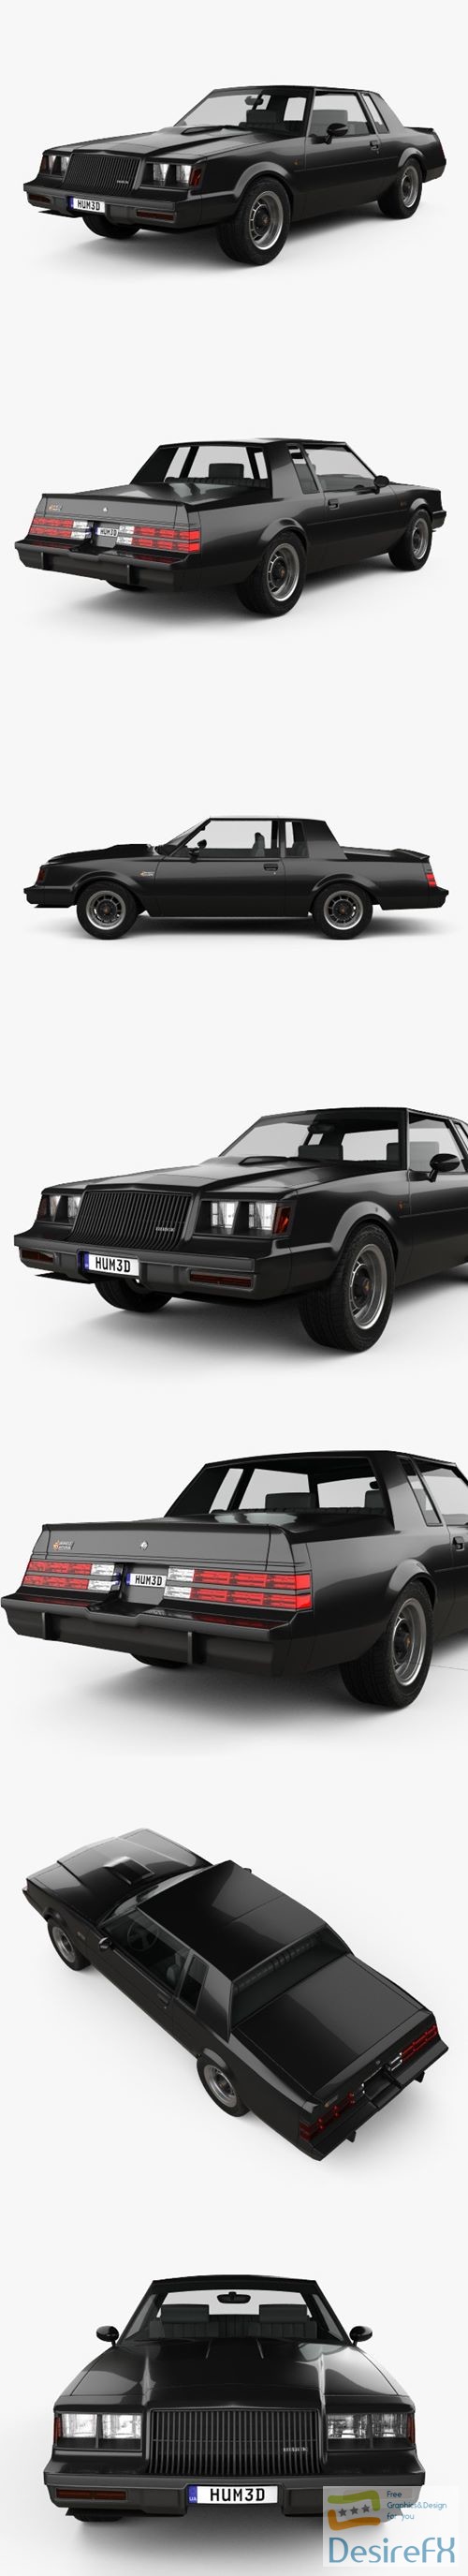 Buick Regal Grand National coupe 1987 3D Model